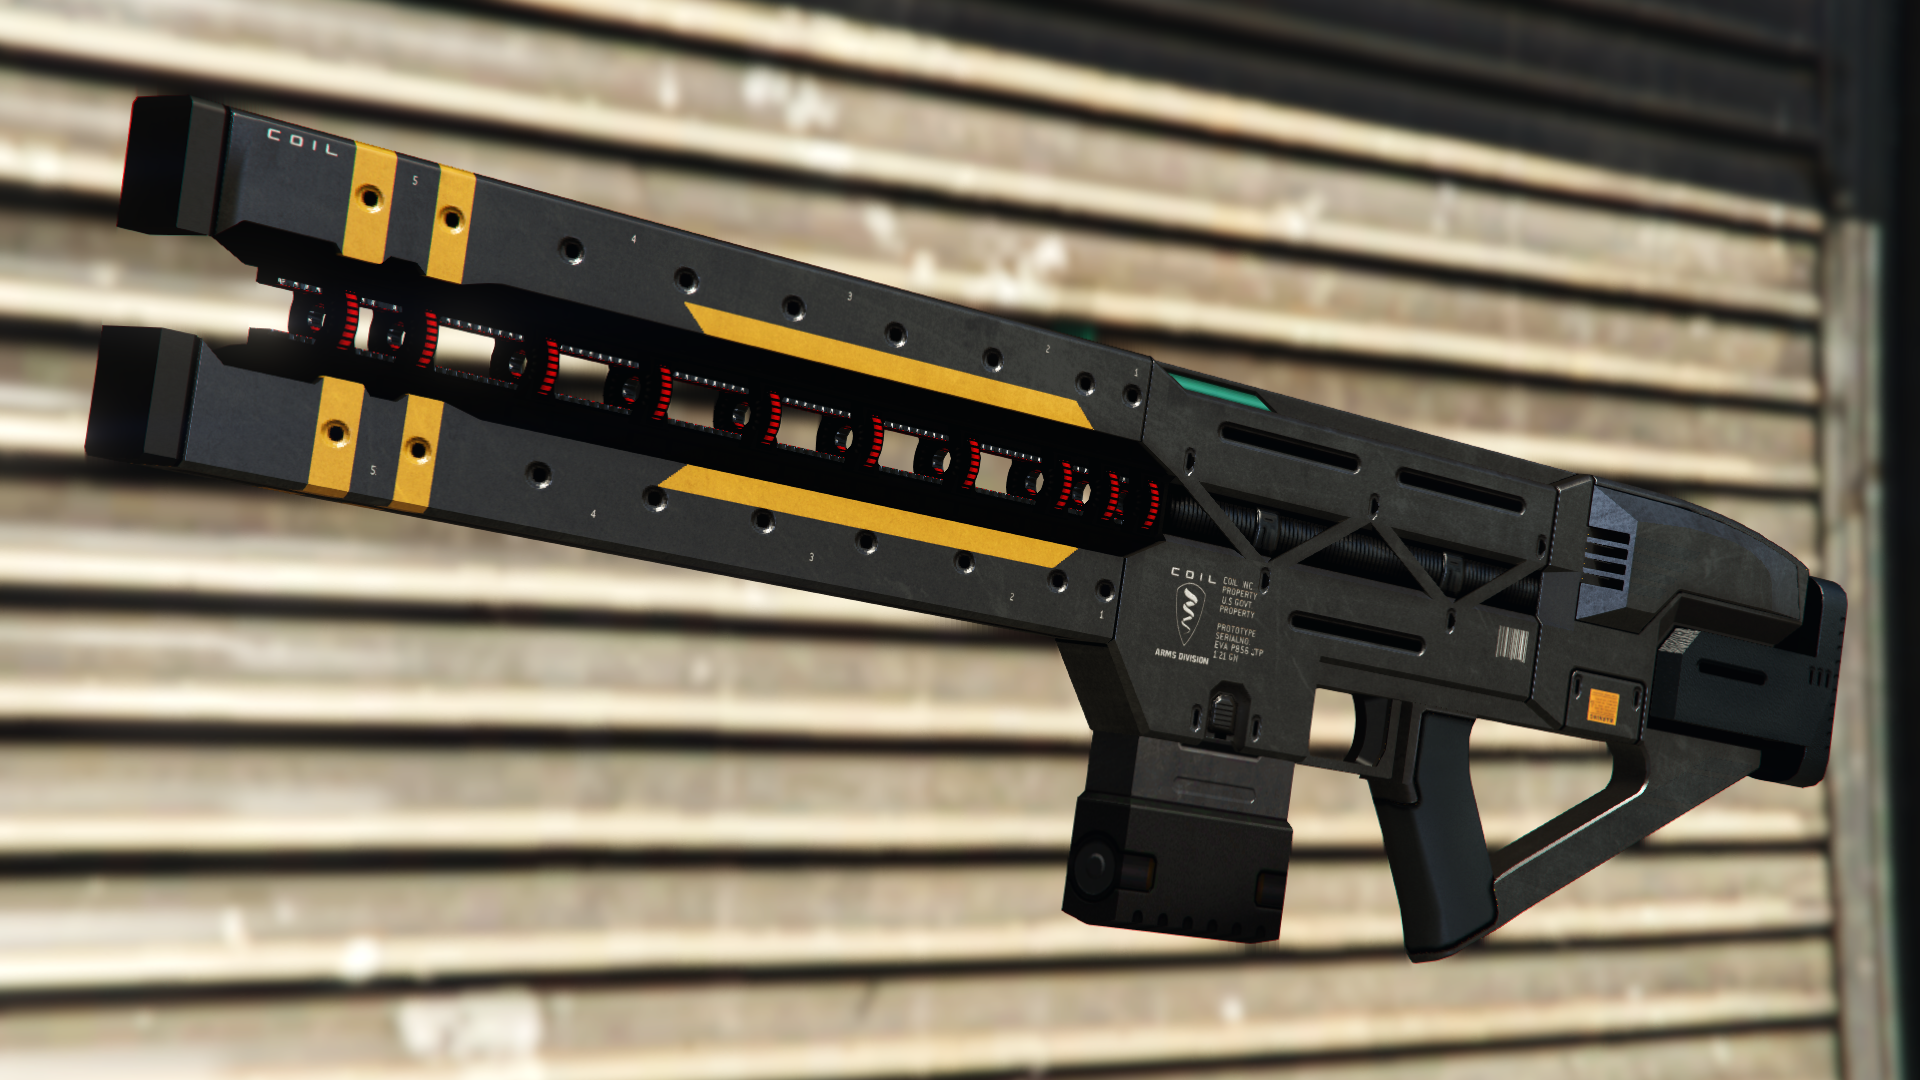 Infinite Ammo + Weapons Attachments for GTA5 or FiveM - GTA5-Mods.com